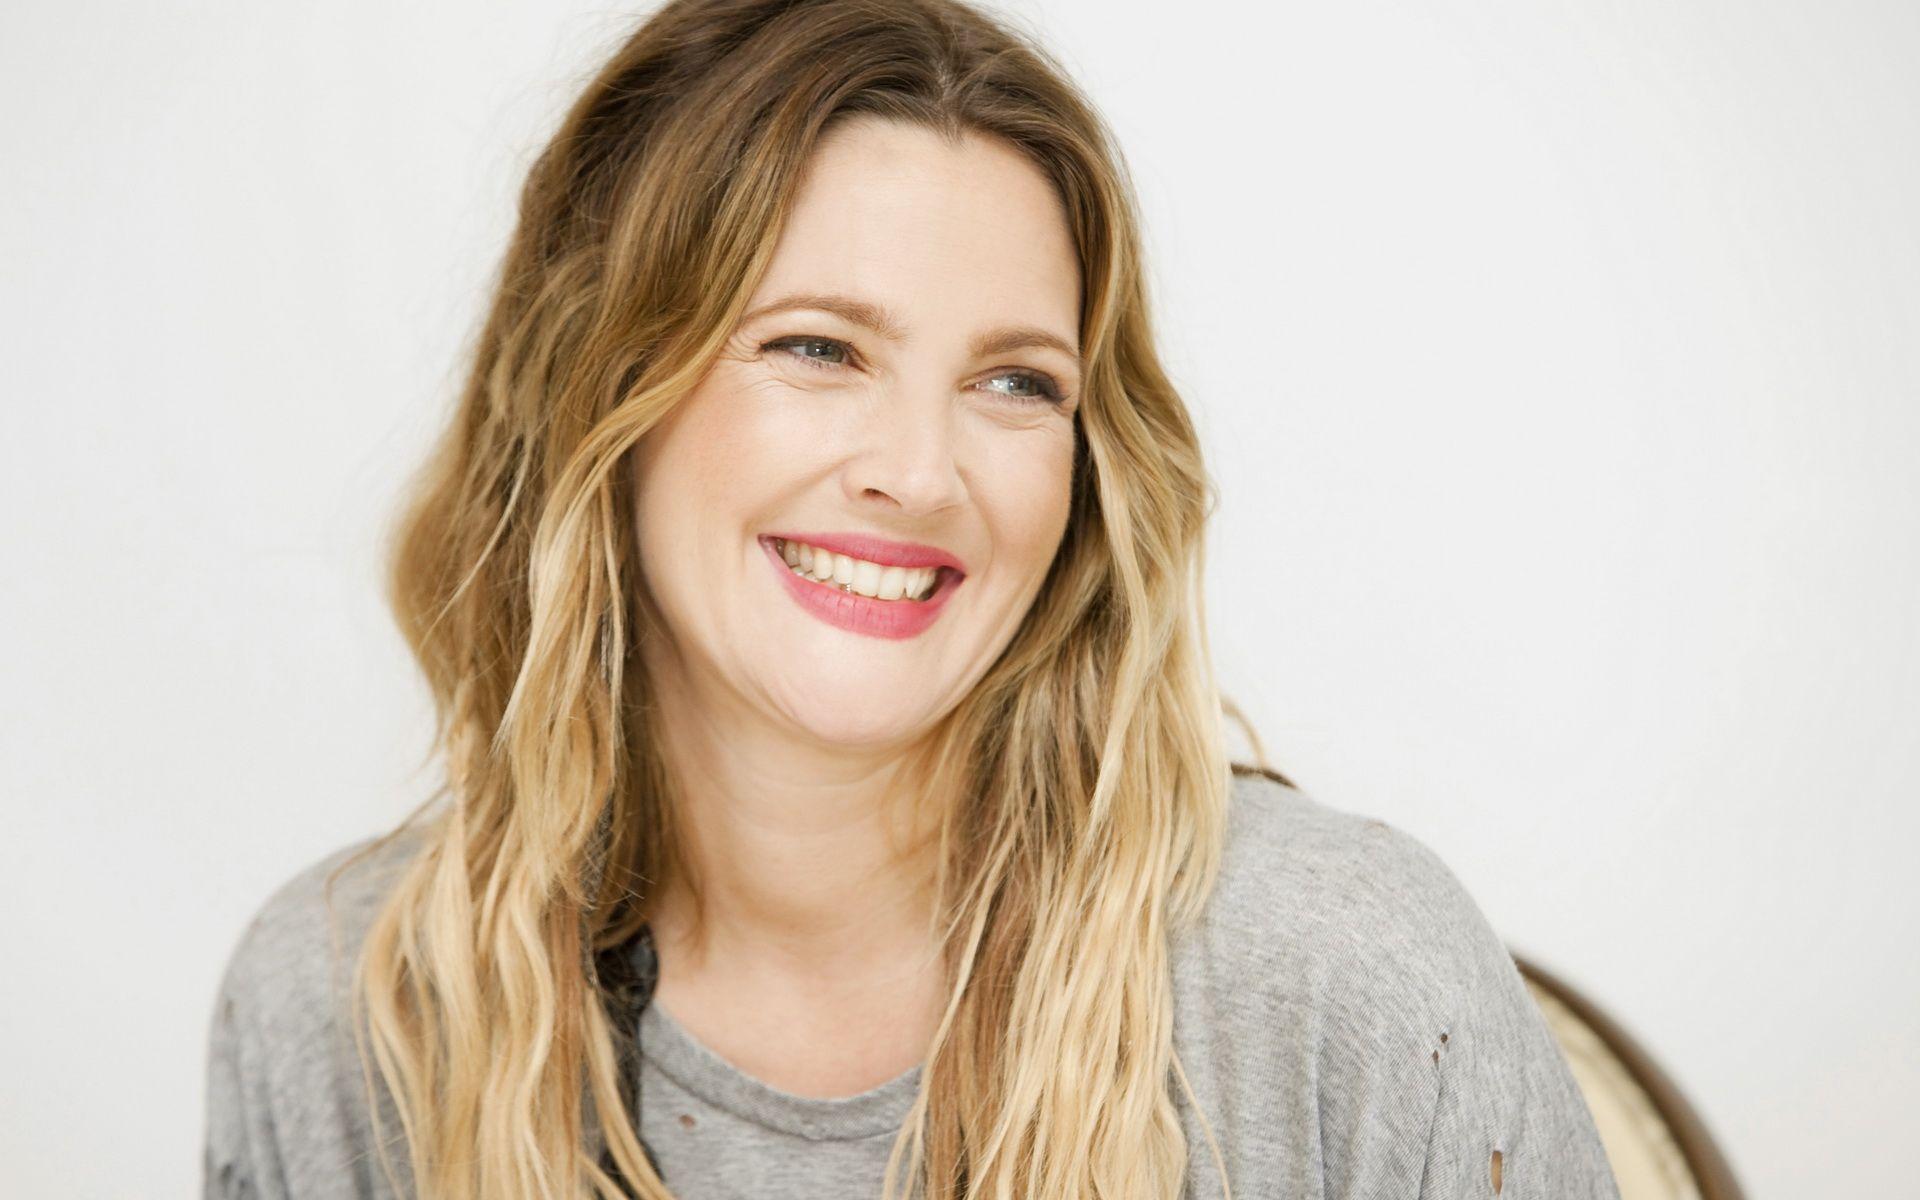 Drew Barrymore Wallpaper High Resolution and Quality Download